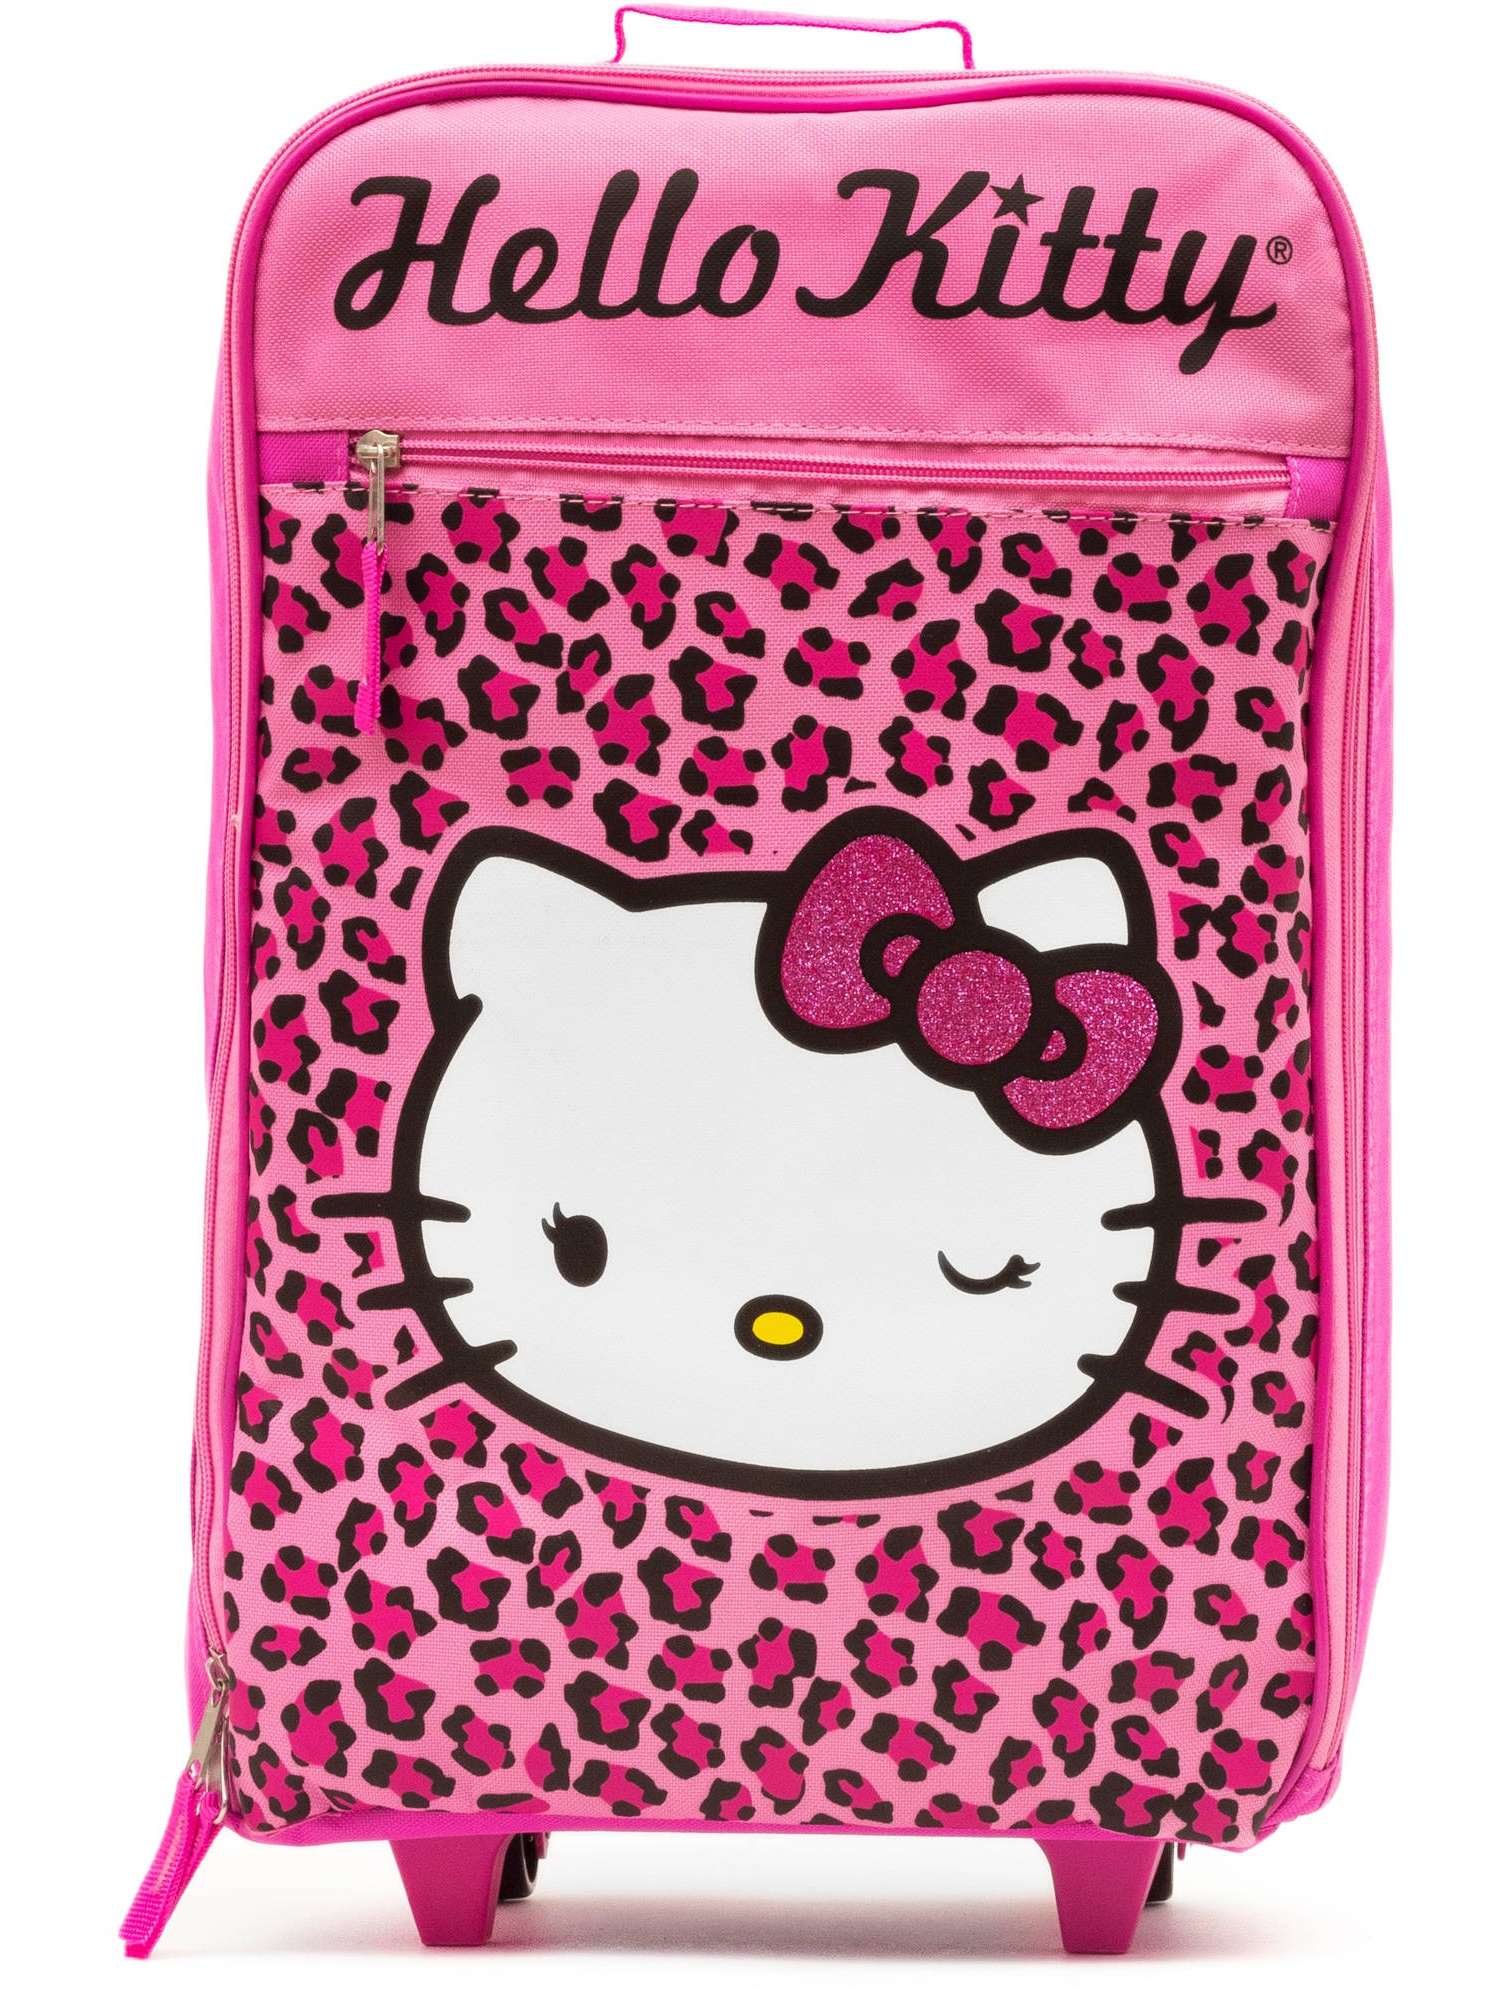 Hello Kitty Pilot Case, Pink - image 2 of 2